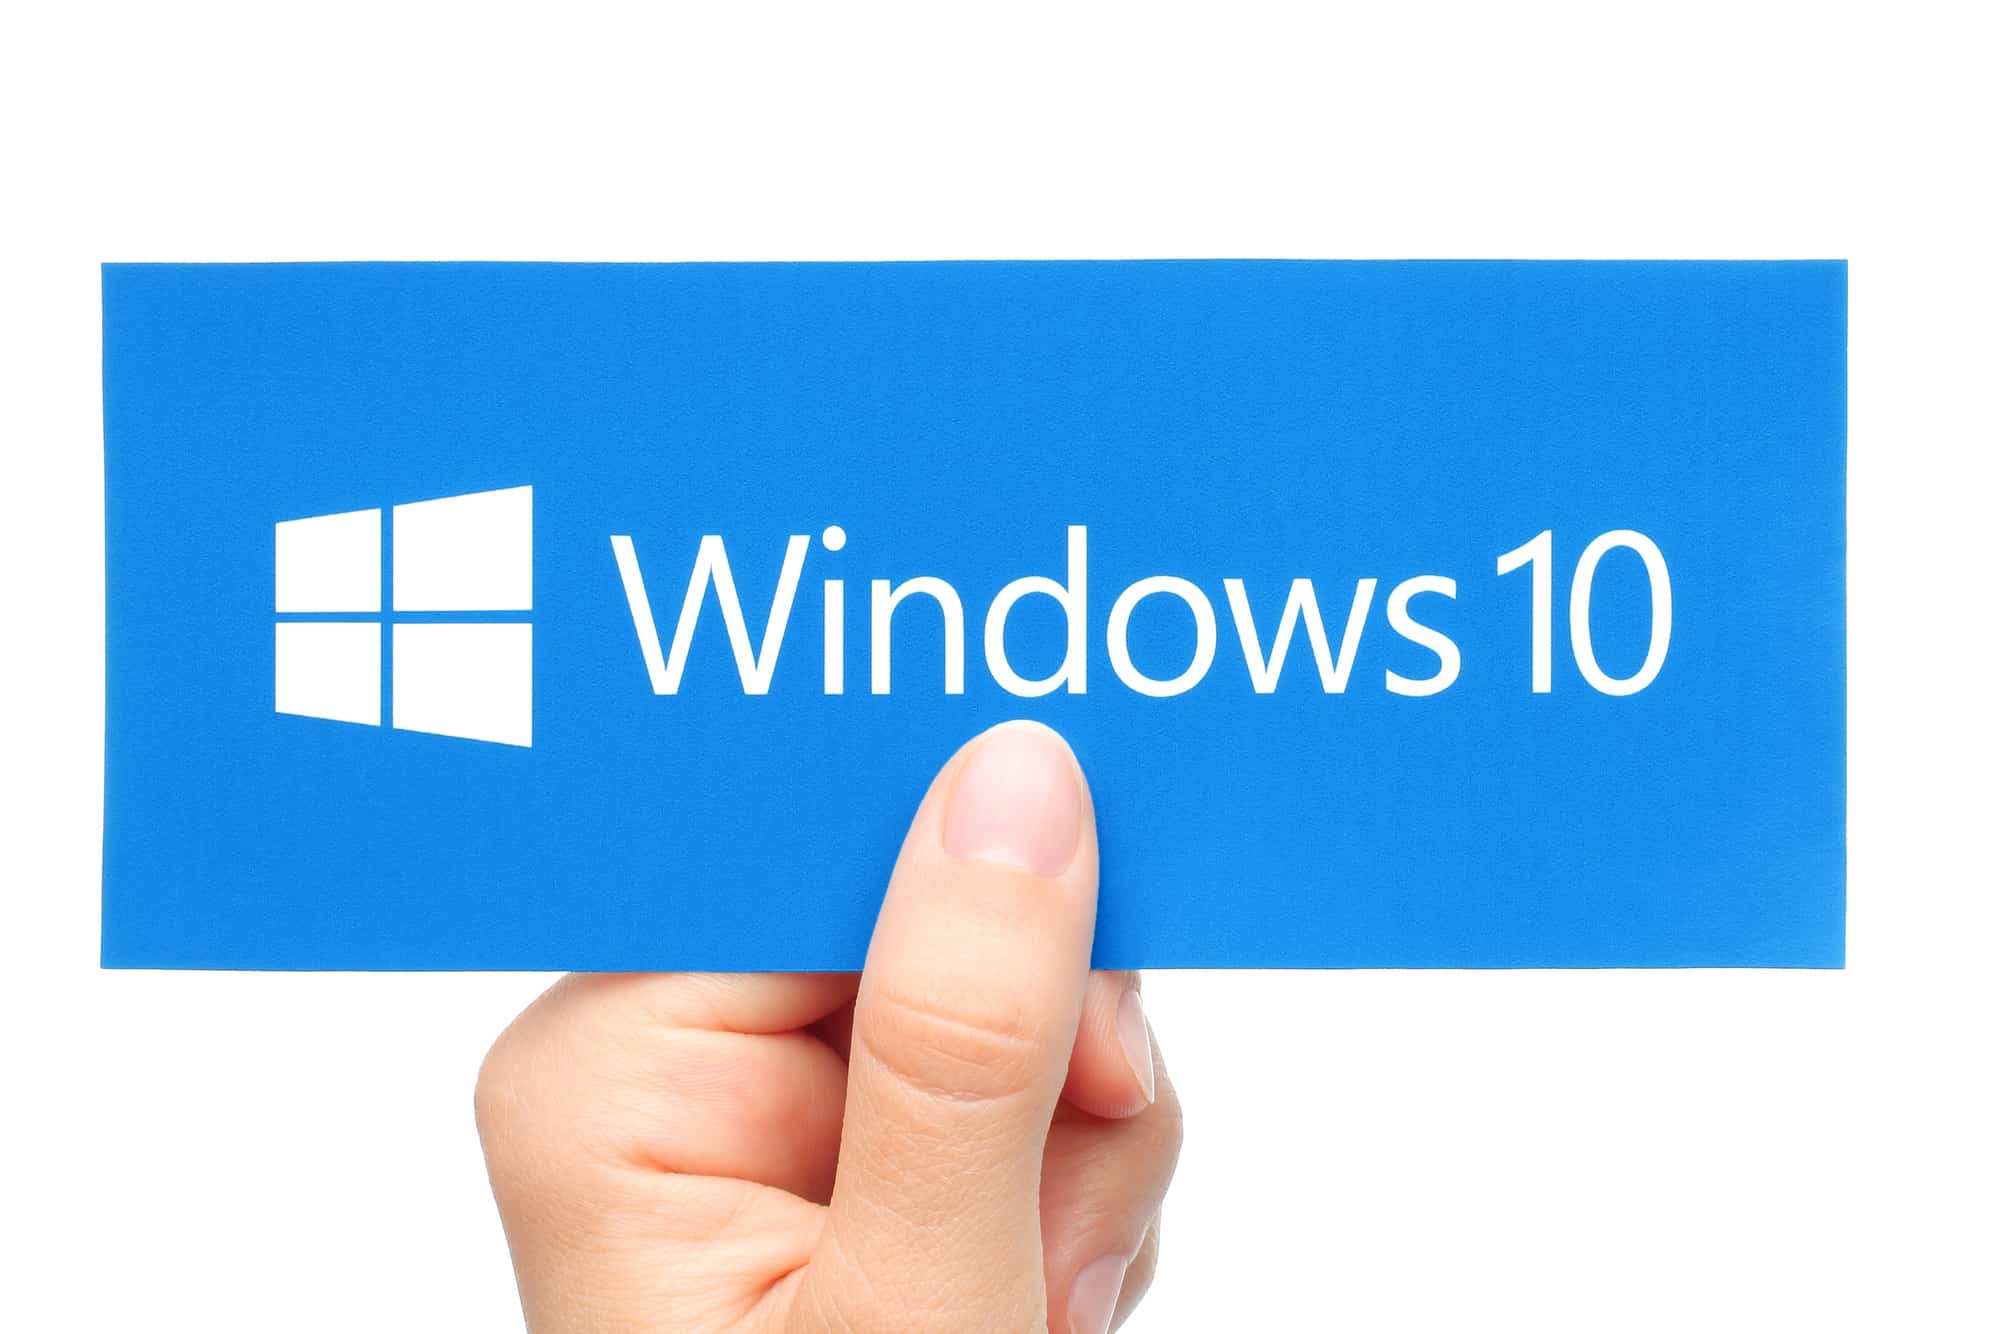 Steps for Ensuring a Smooth Upgrade from Windows 7 to Windows 10